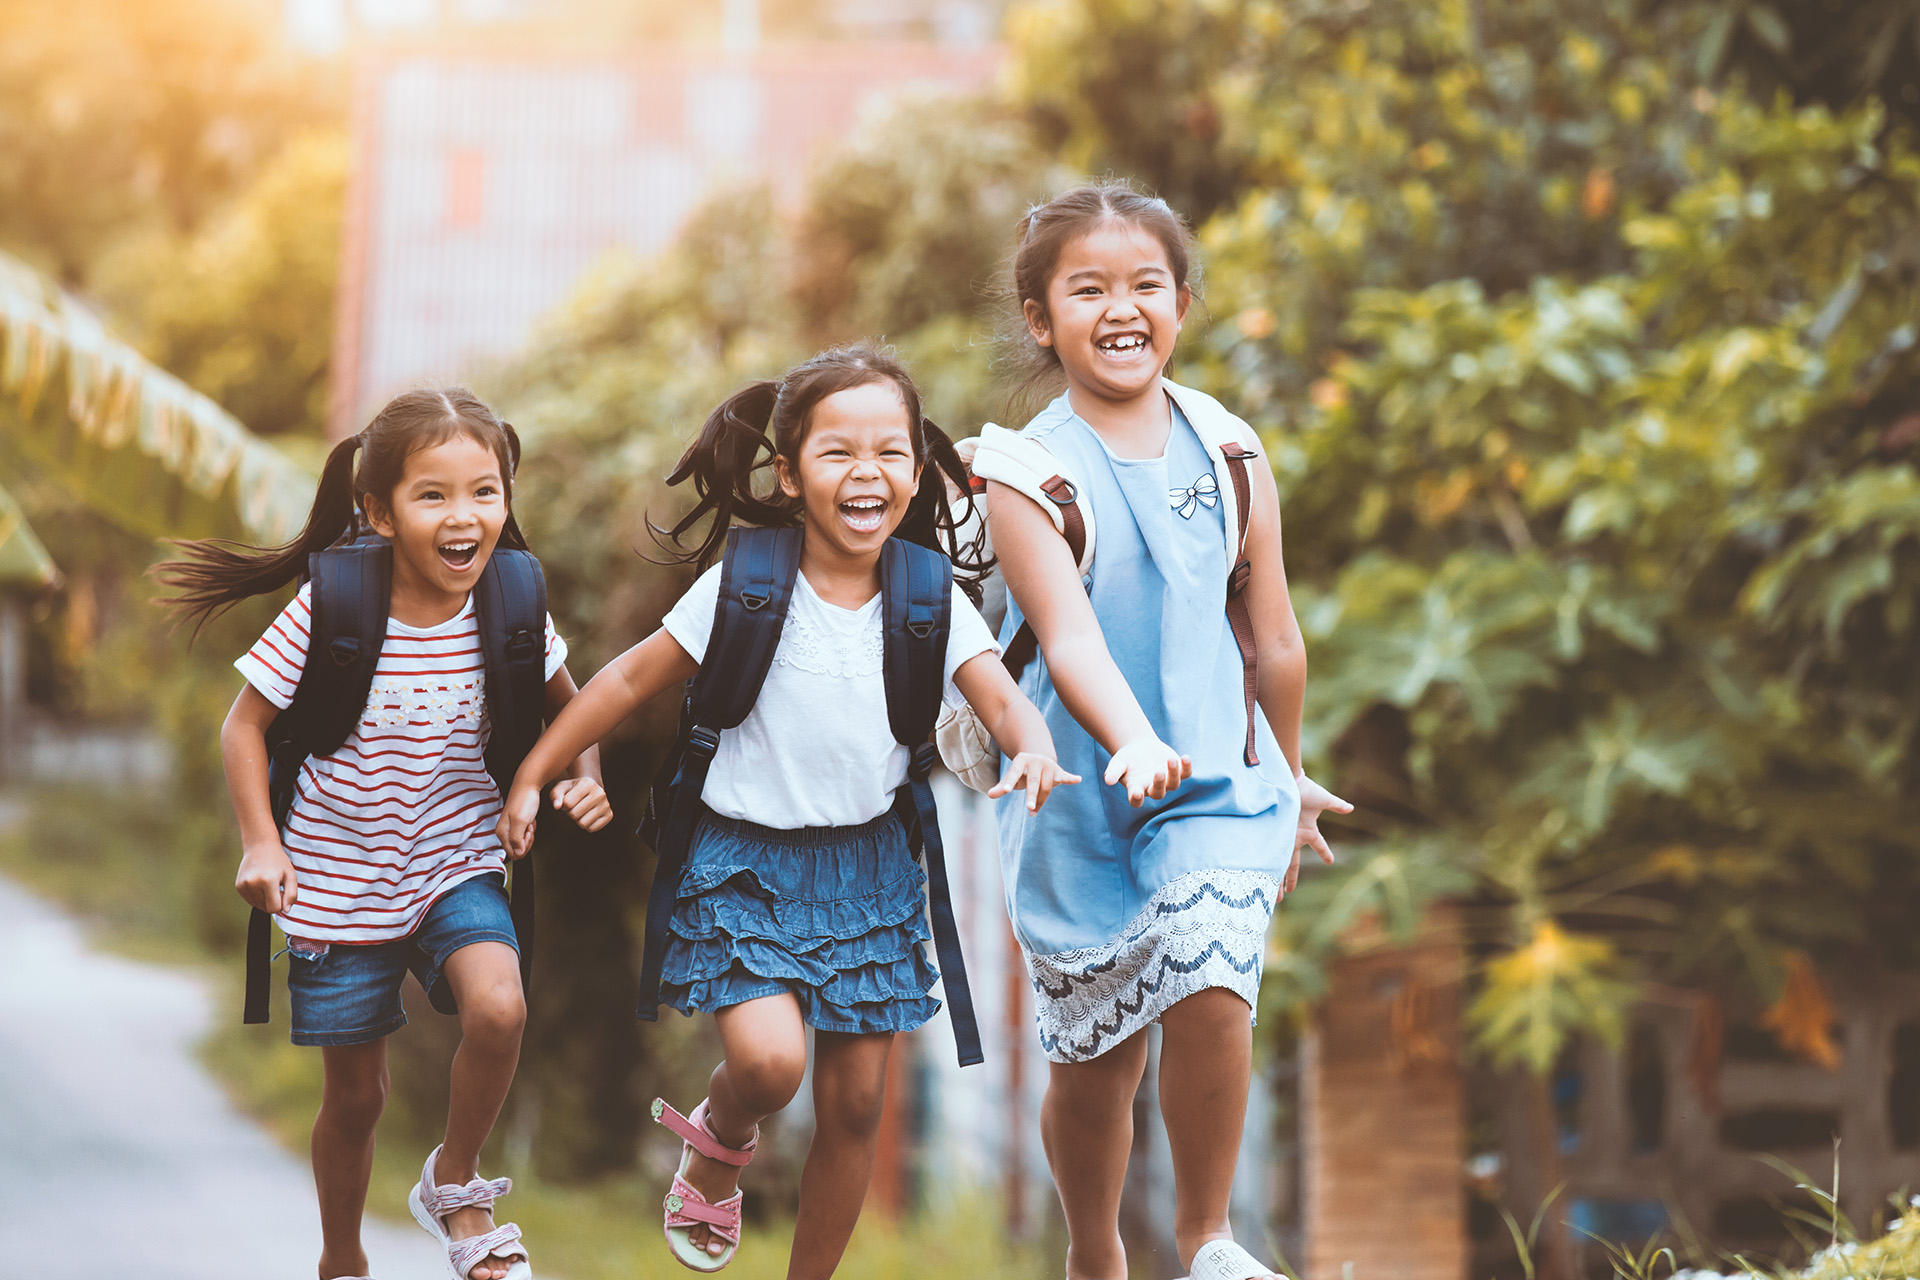 Three young girls with backpacks running on sidewalk